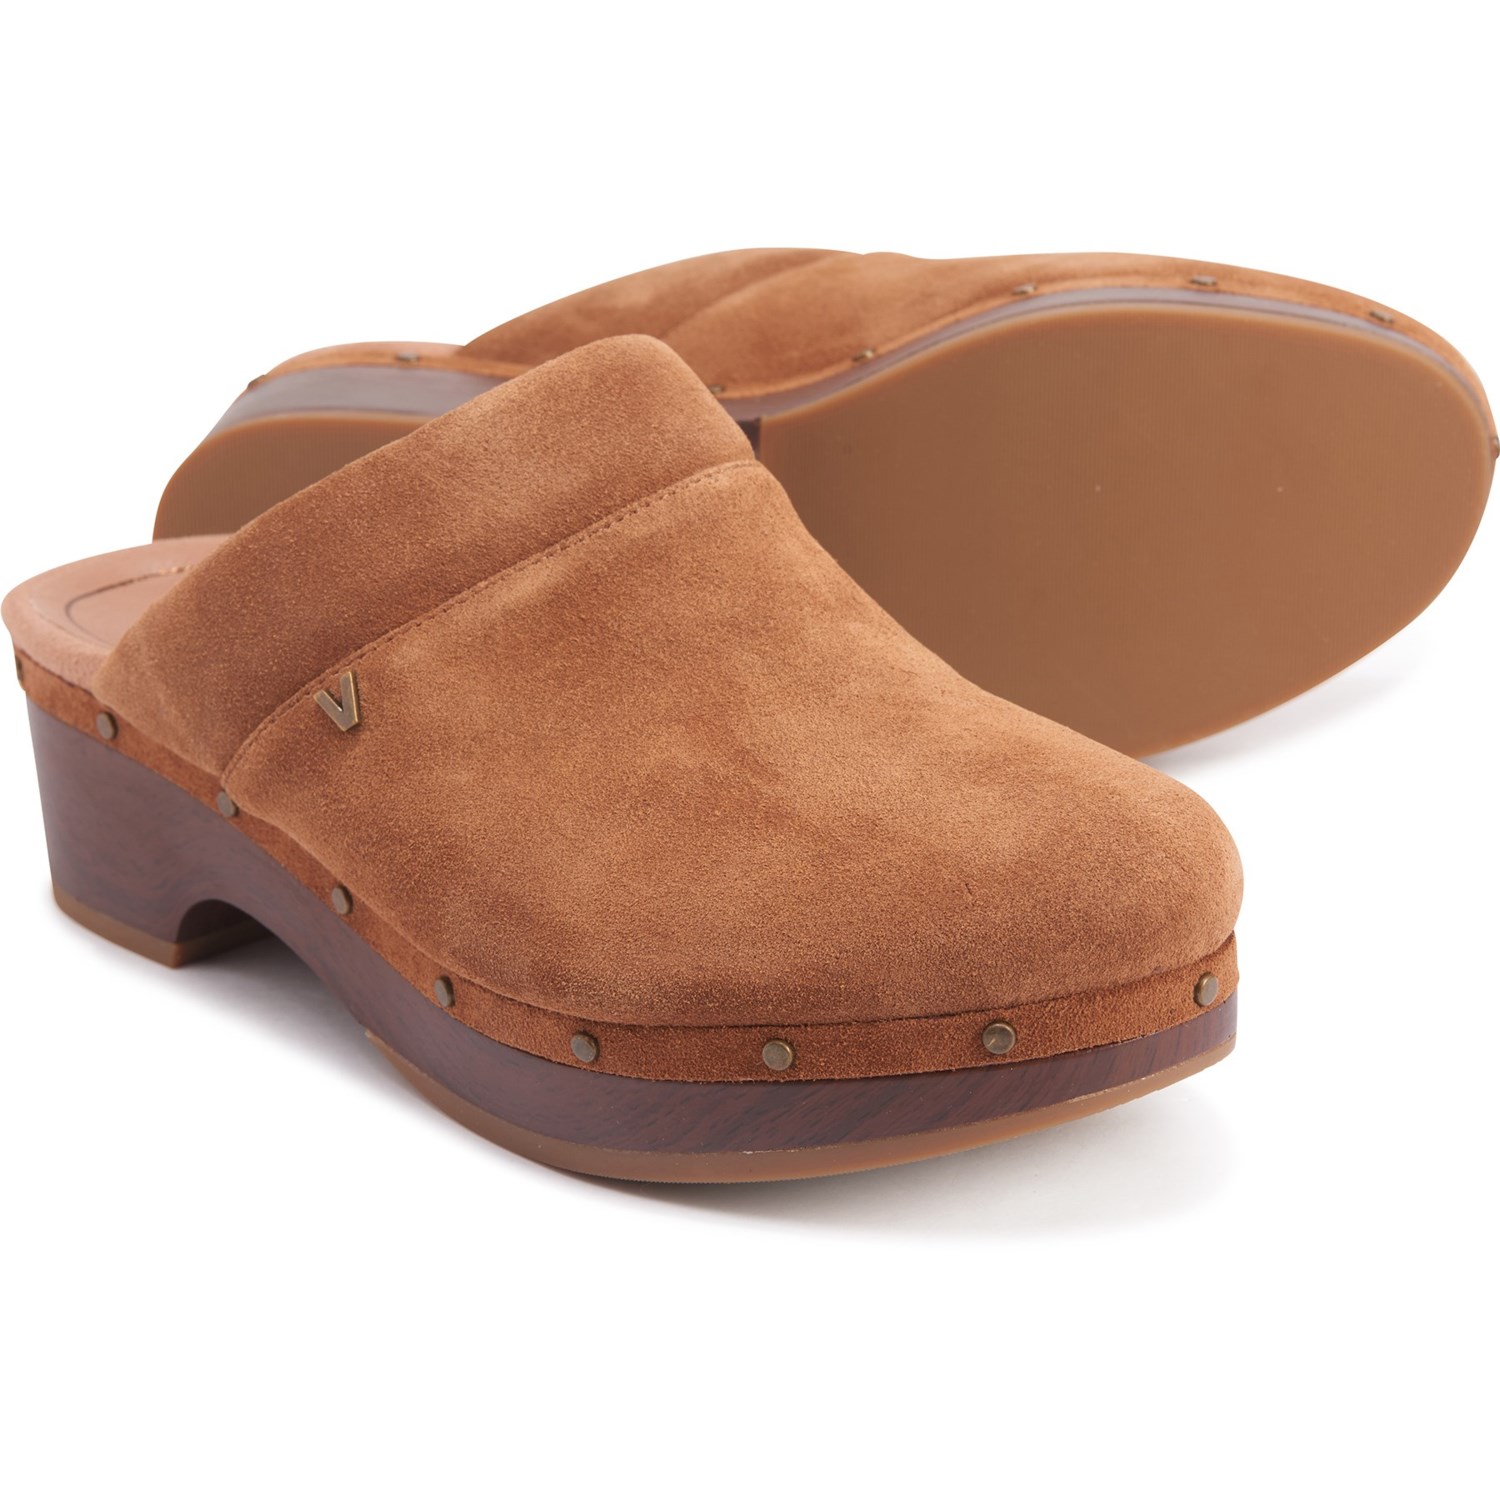 clogs for women